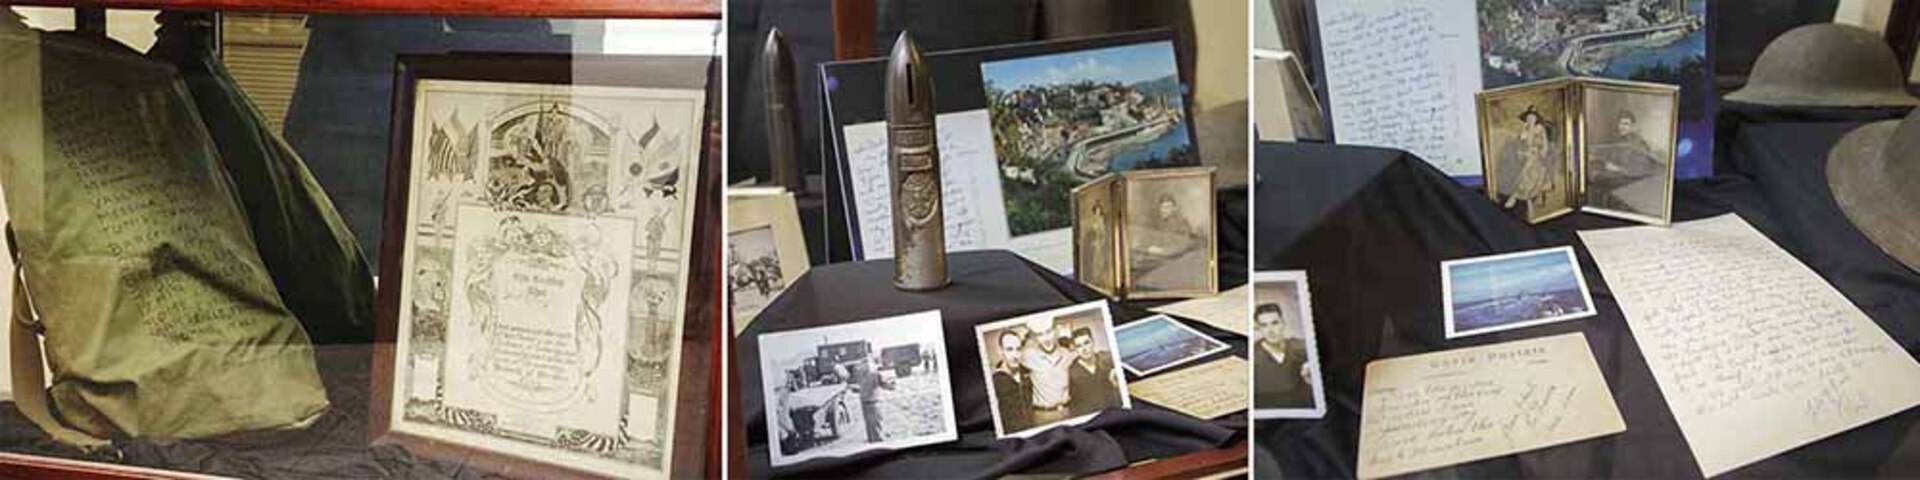 War Memorabilia On Display For Veterans Day Has Special Meaning To Nuwc 